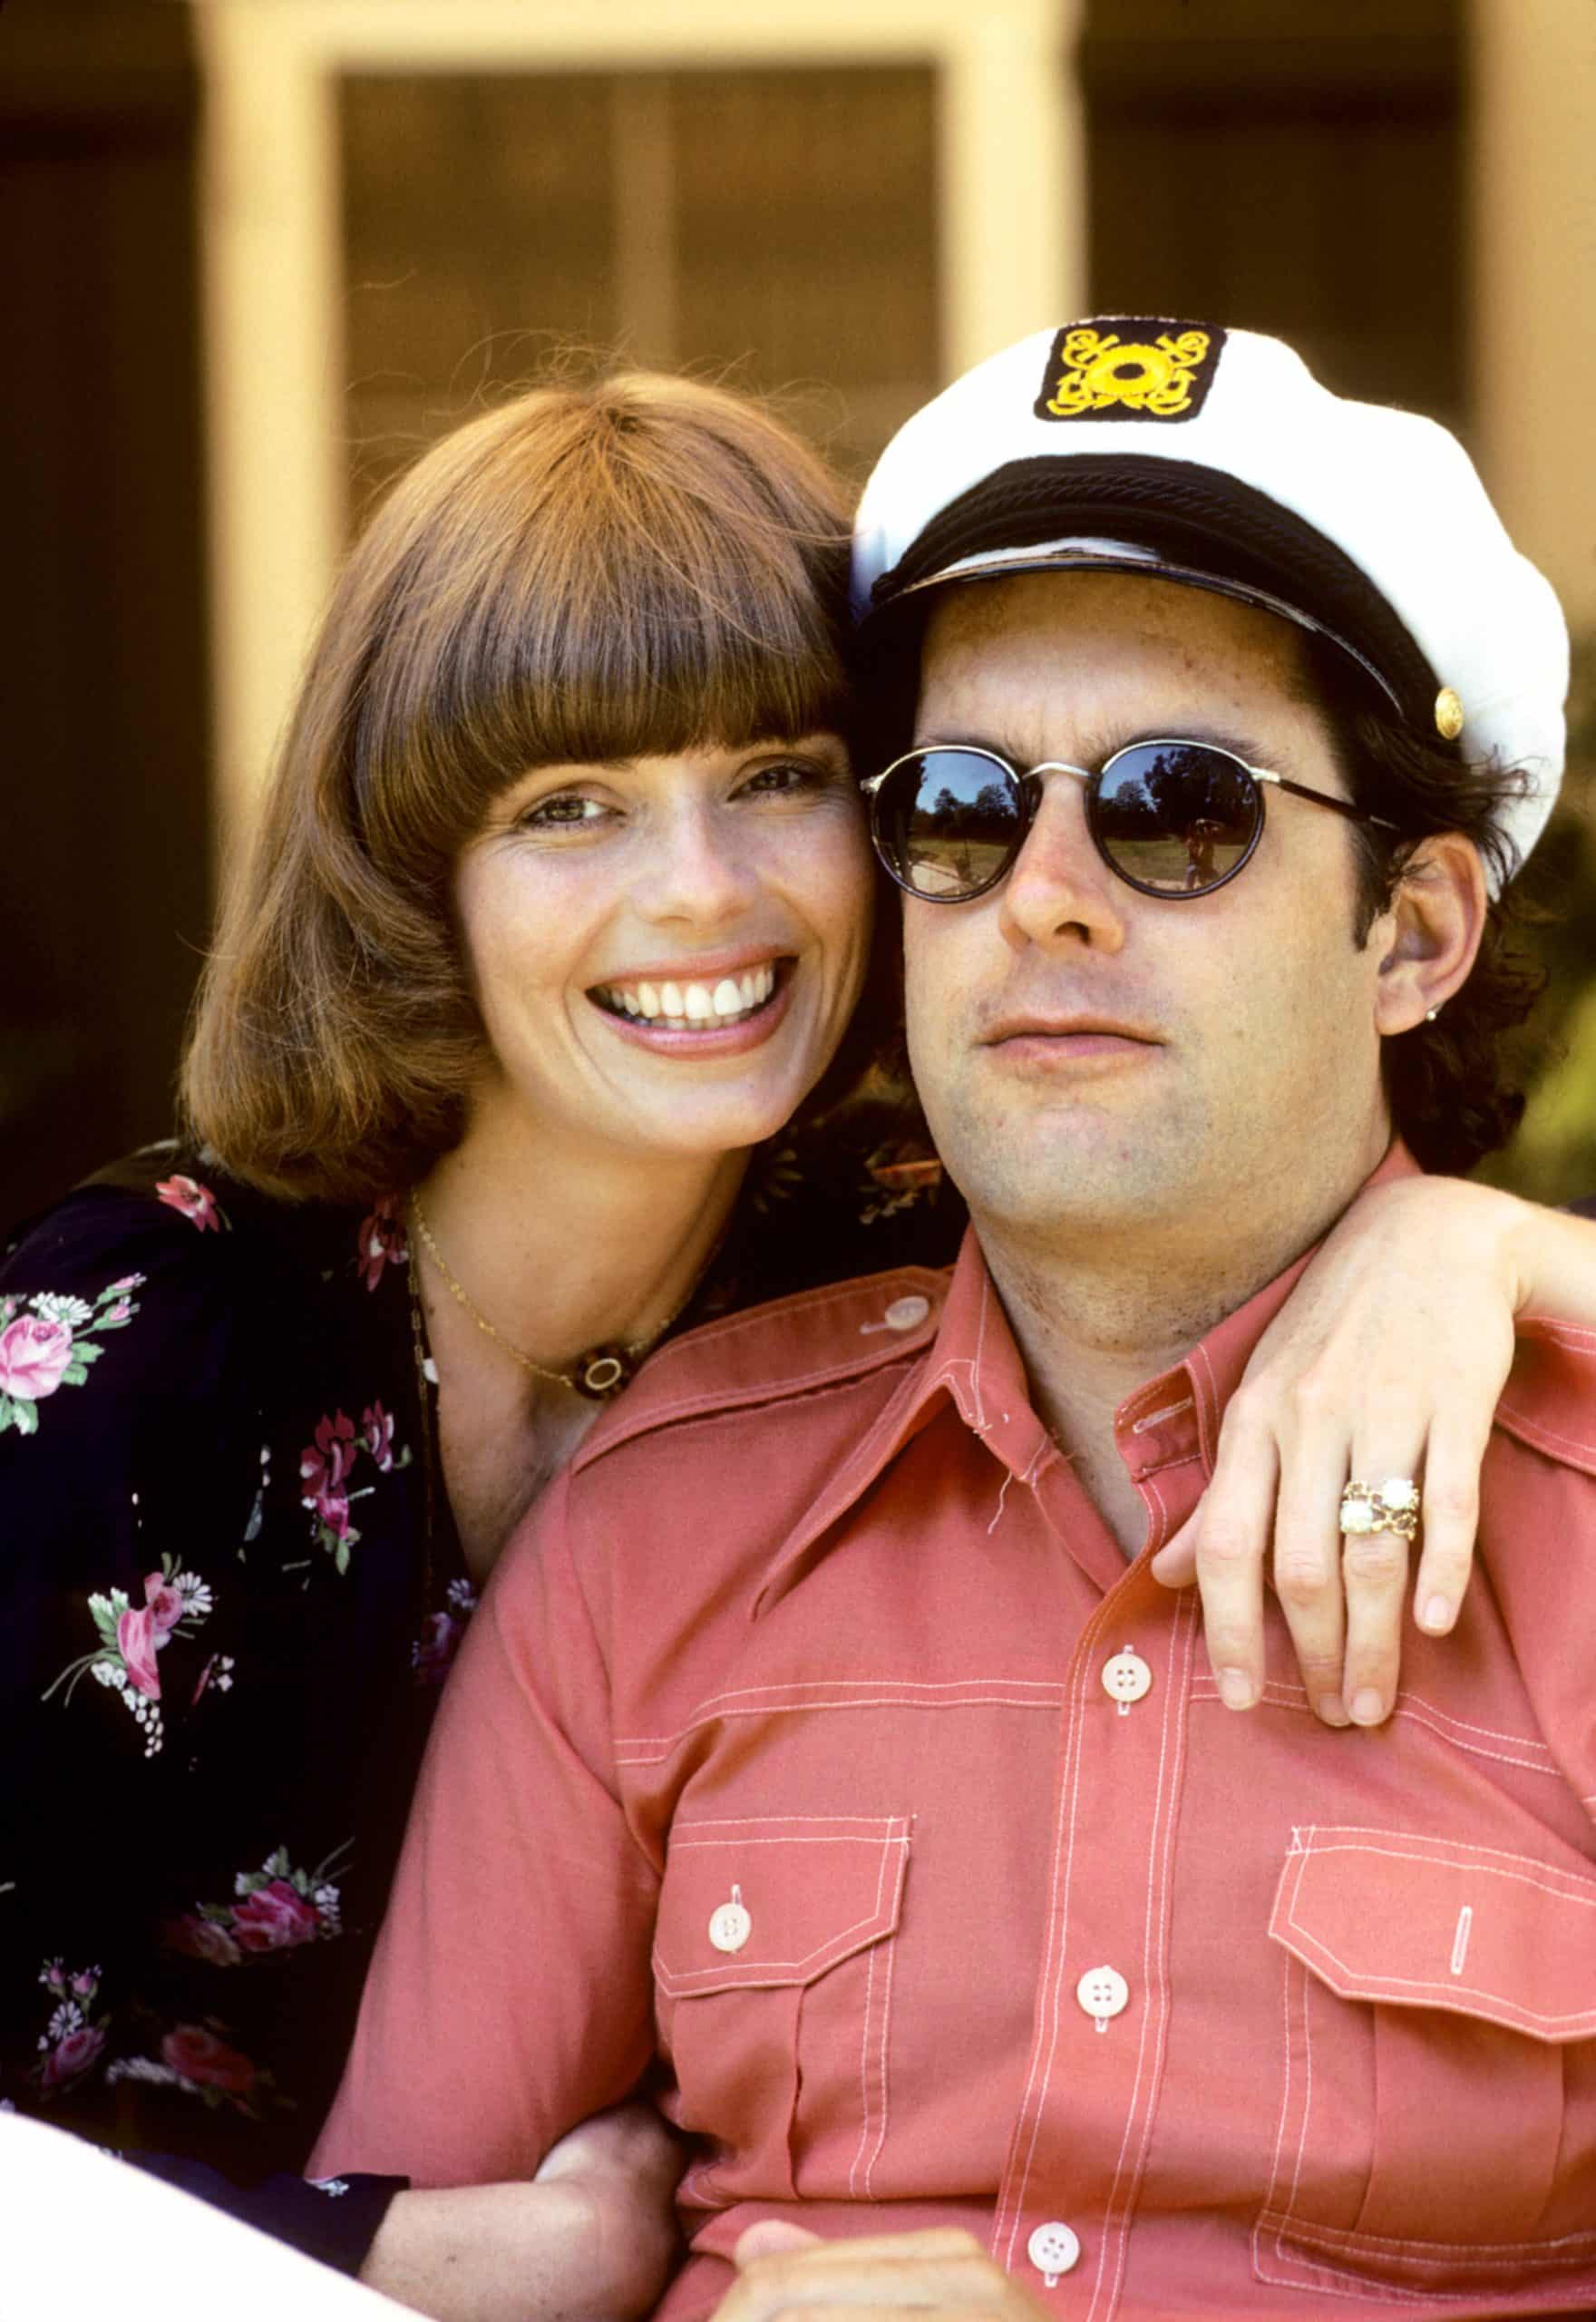 THE CAPTAIN AND TENNILLE, Toni Tennille, Daryl Dragon, 1976-77